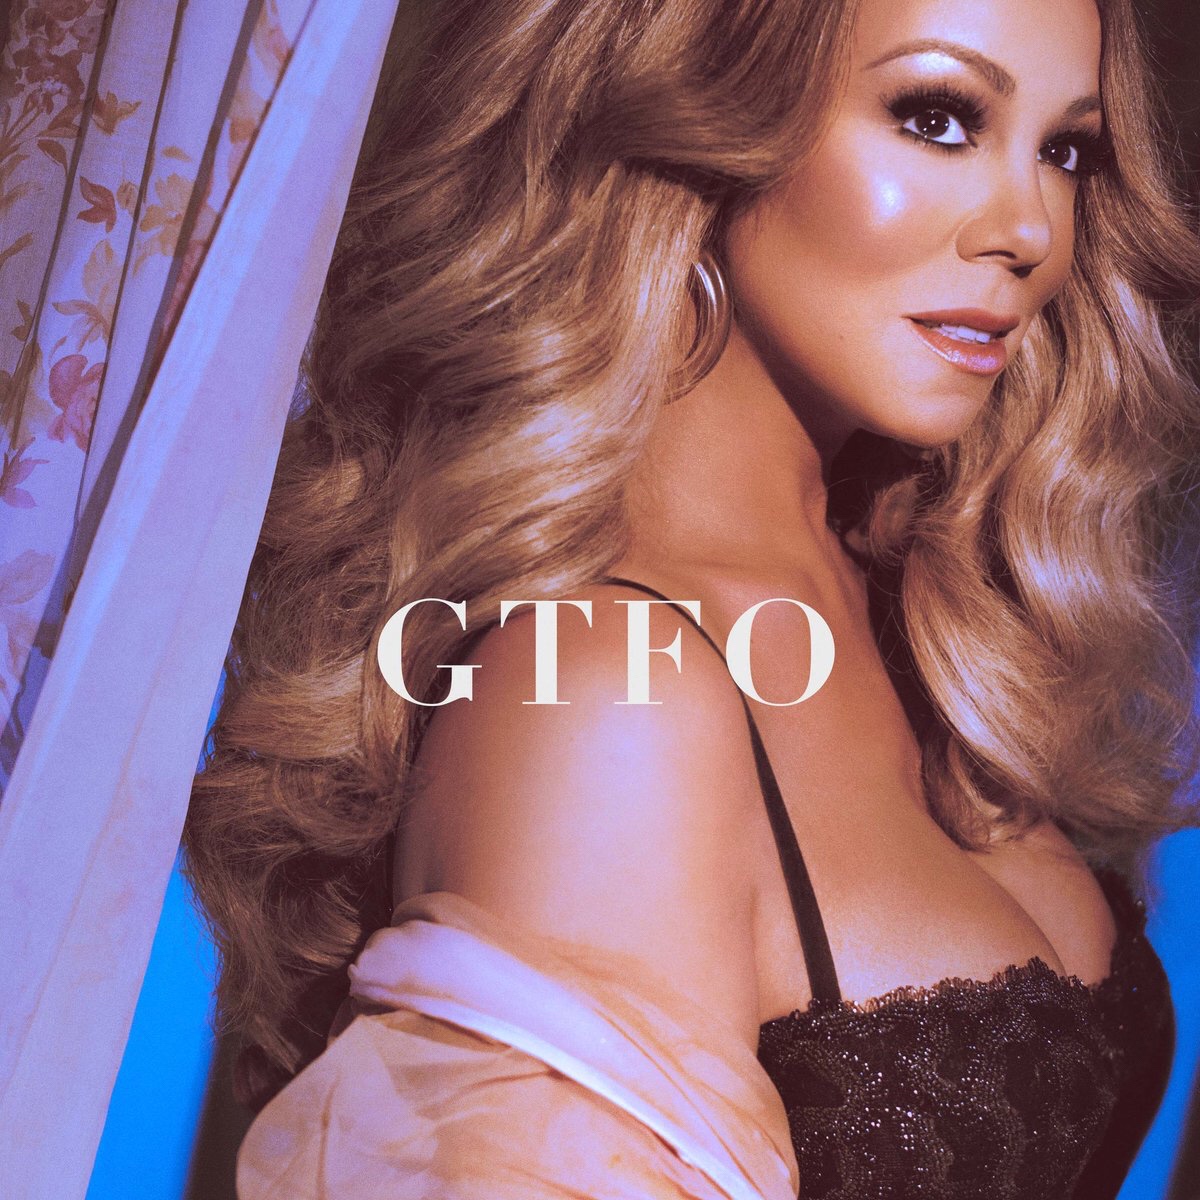 Mariah Is Back! Listen To “GTFO” (Review & Stream)